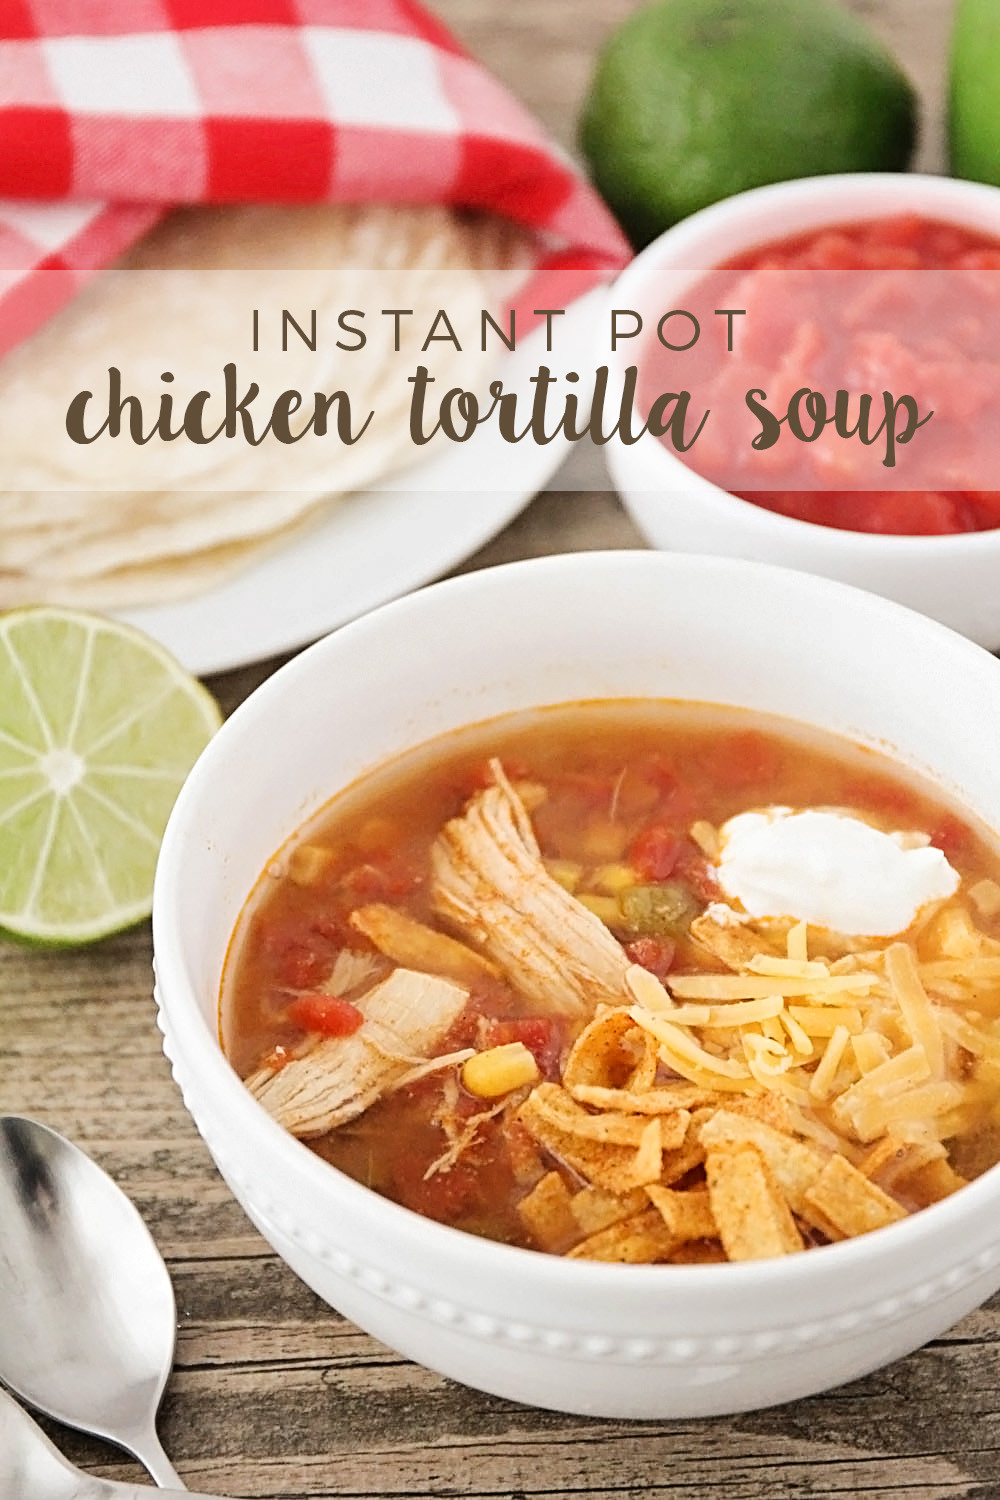 Instant Pot Whole Chicken Soup
 The Baker Upstairs Instant Pot Chicken Tortilla Soup